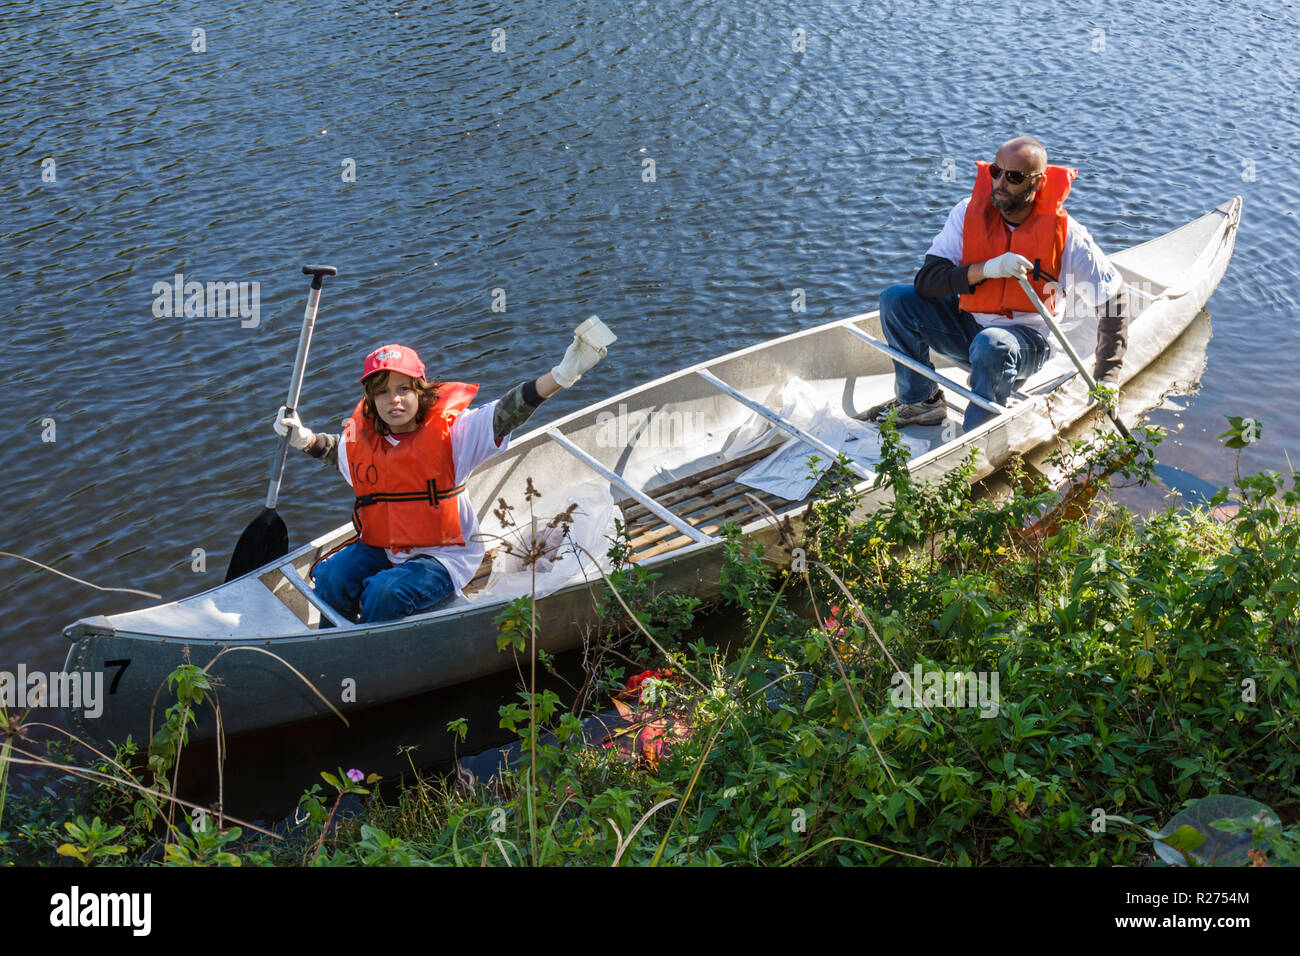 Miami Florida,Oakland Grove,Annual Little River Day Clean Up,trash,pick up,litter,floating debris,clean,pollution,volunteer volunteers volunteering wo Stock Photo